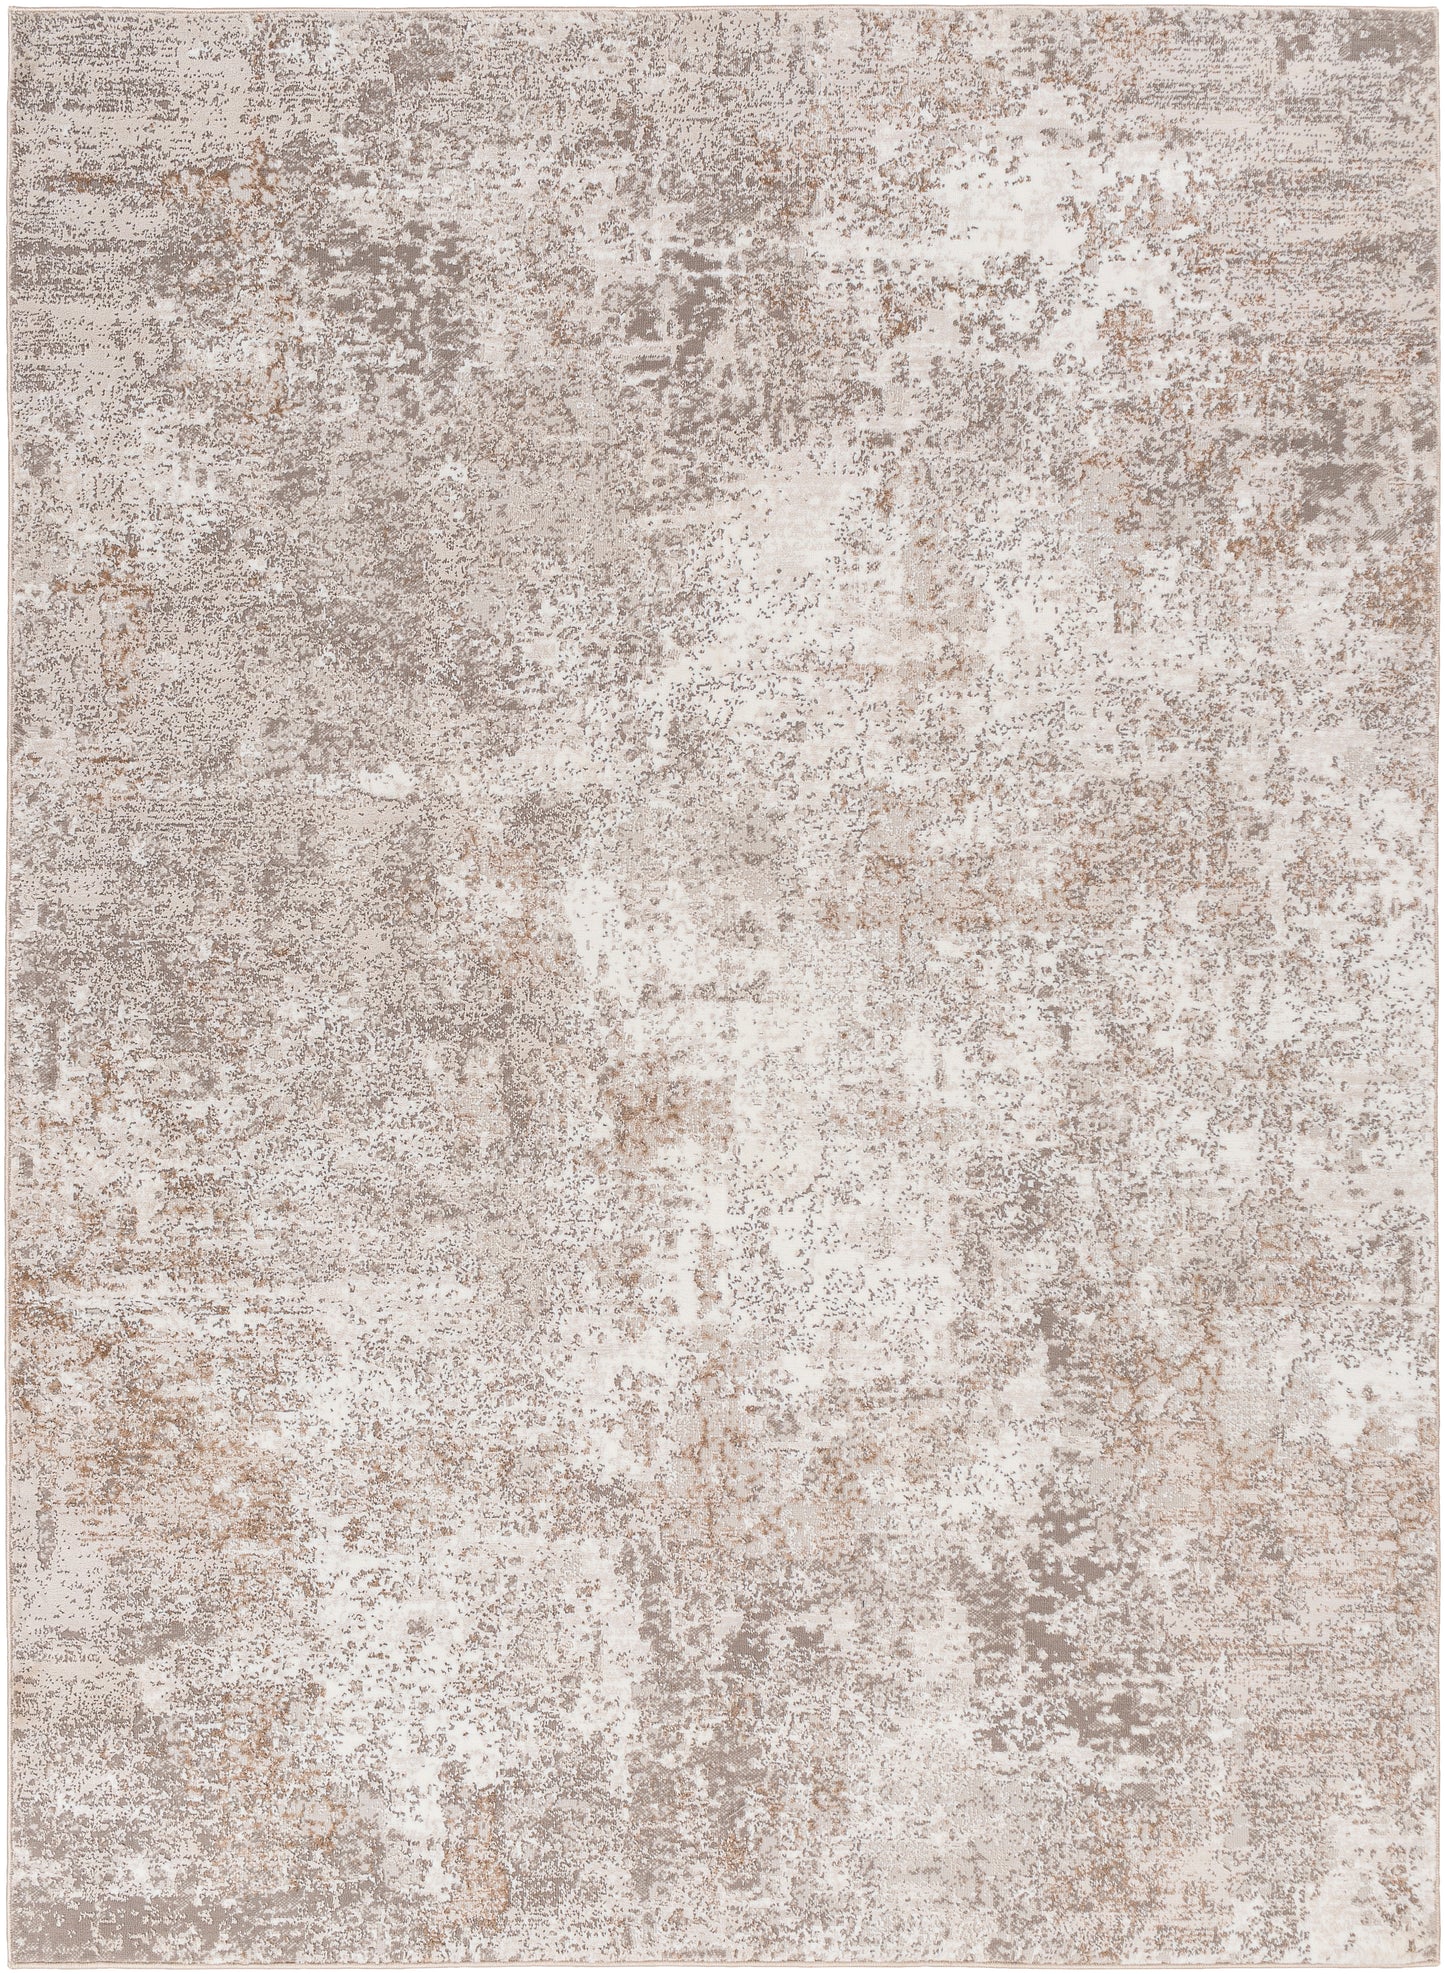 Allegro plus 31122 Machine Woven Synthetic Blend Indoor Area Rug by Surya Rugs